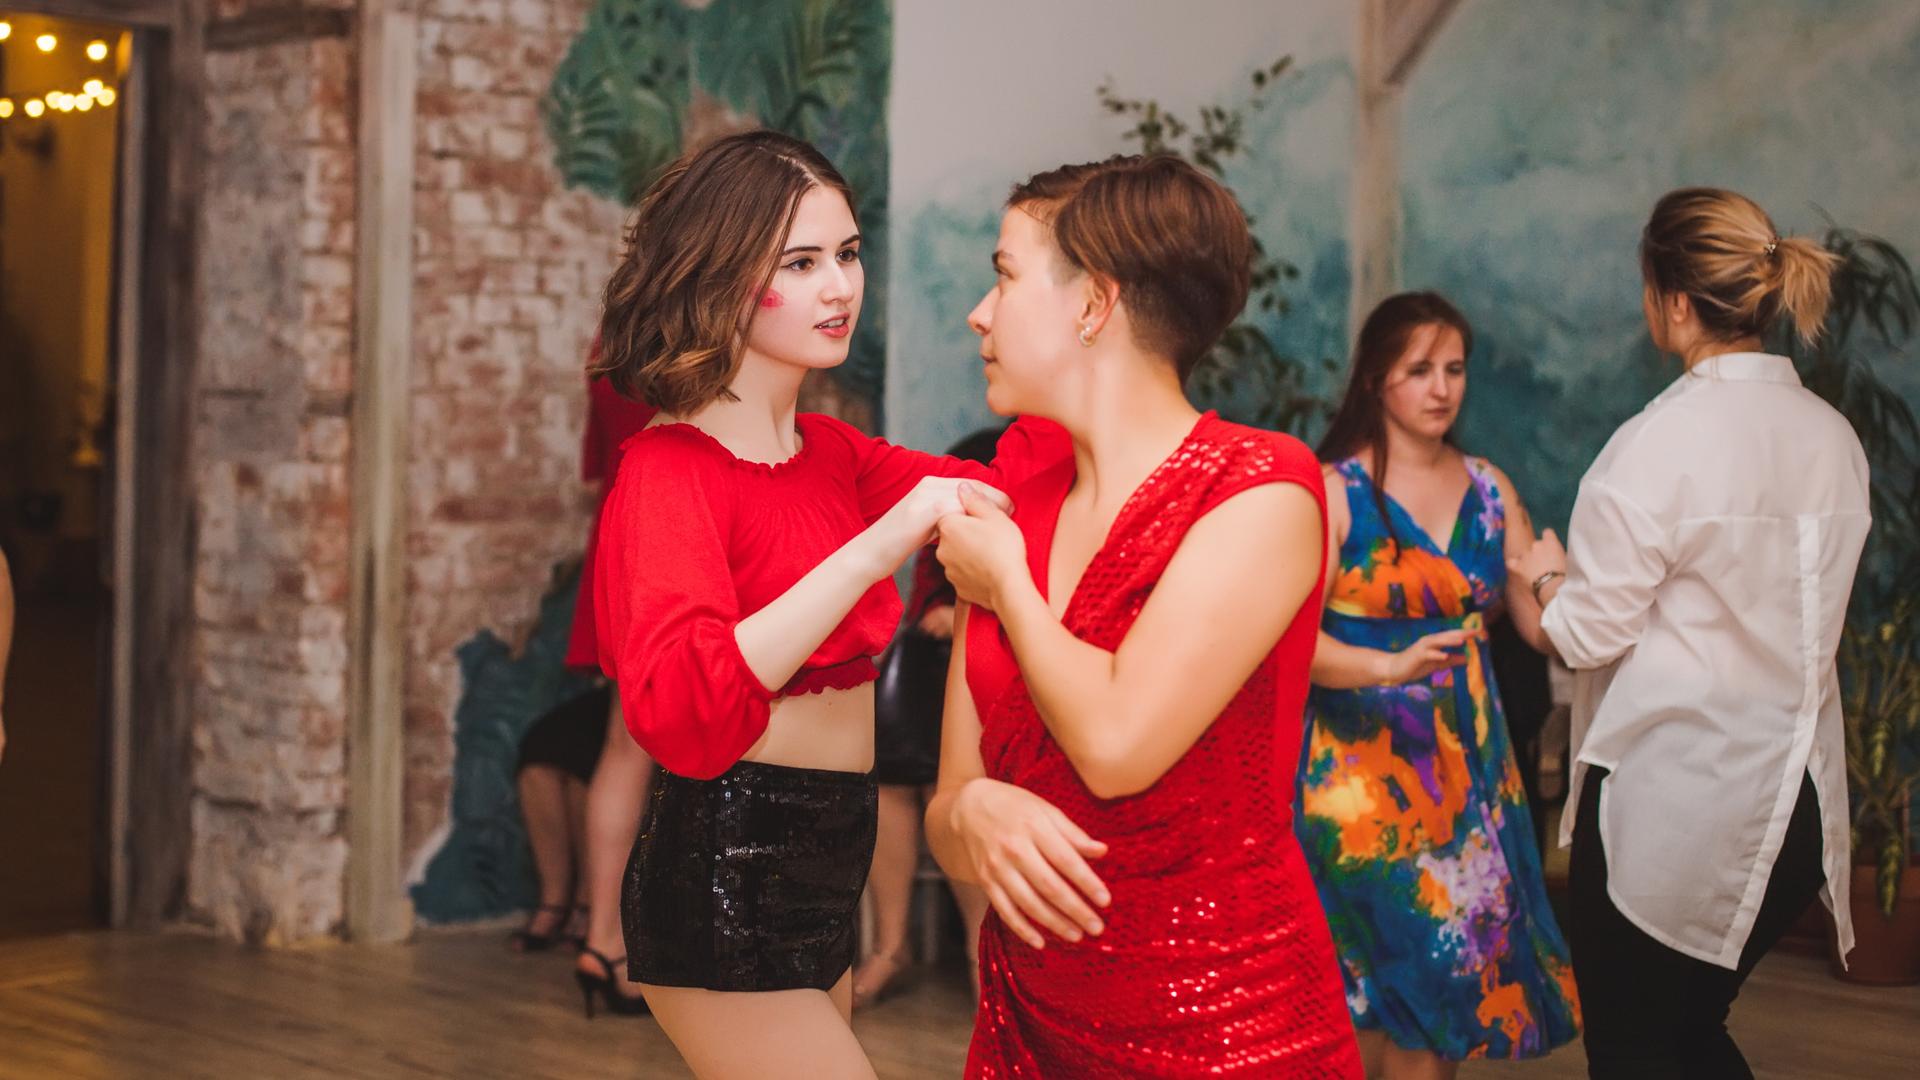 Two women dance together wearing red clothing. 